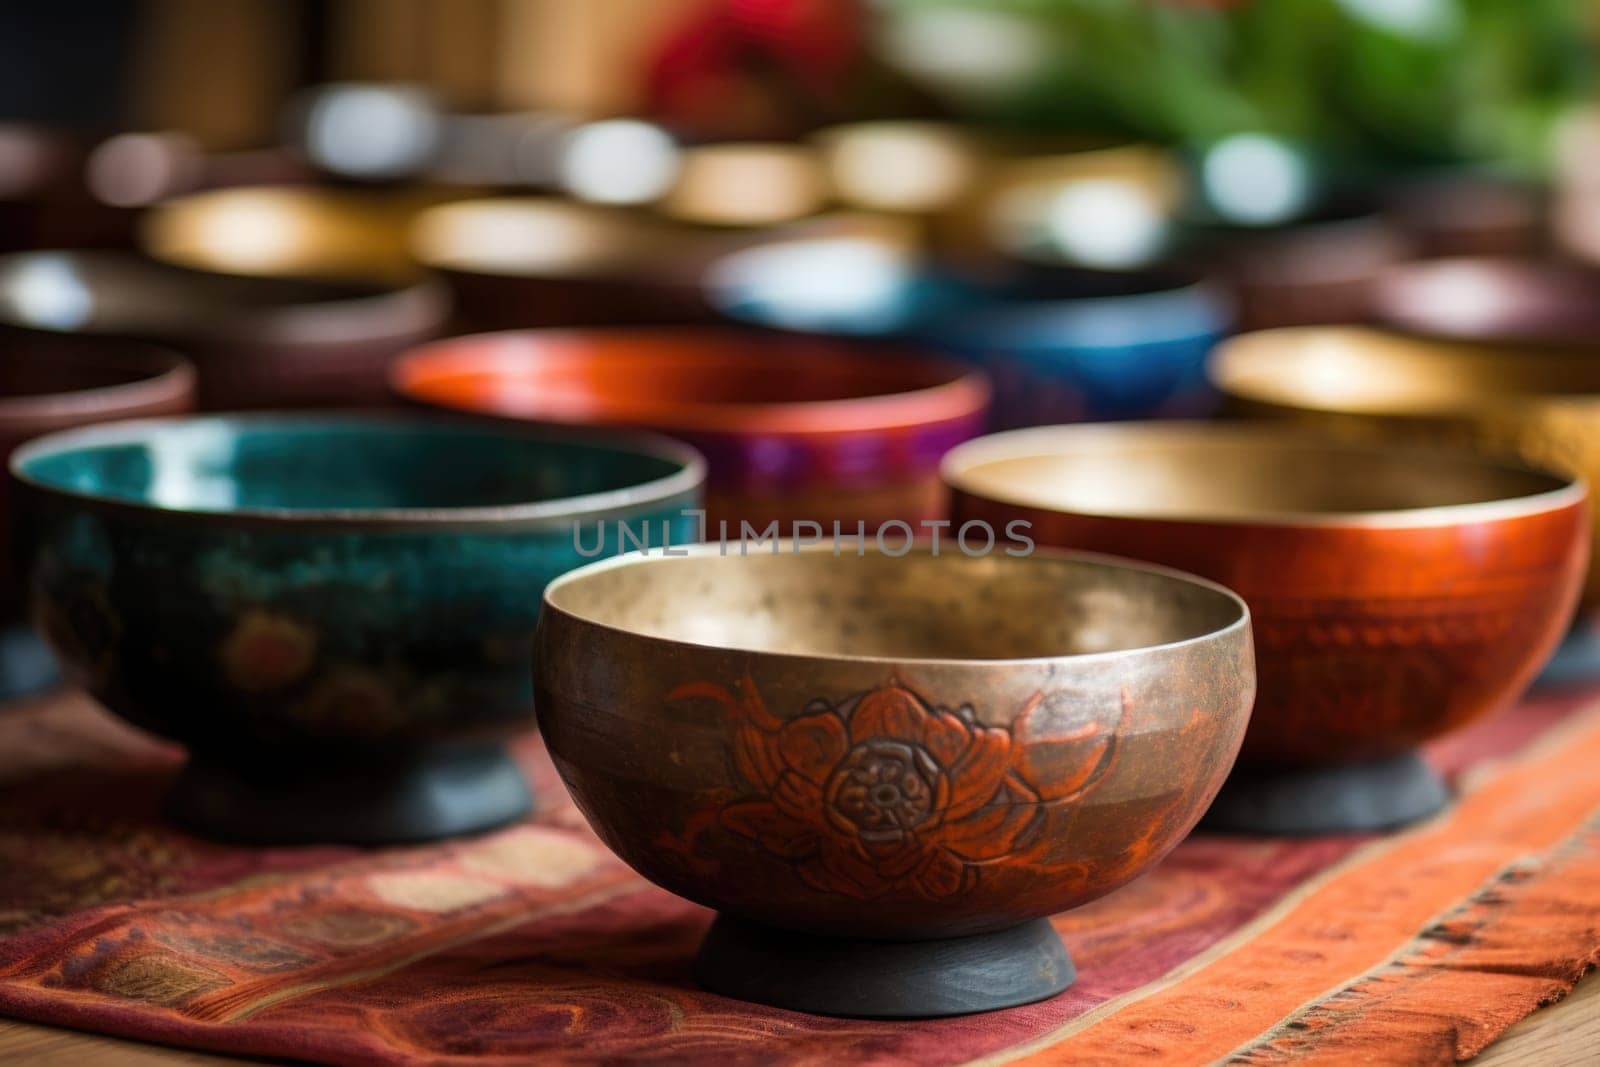 There are many Tibetan bowls on the table.